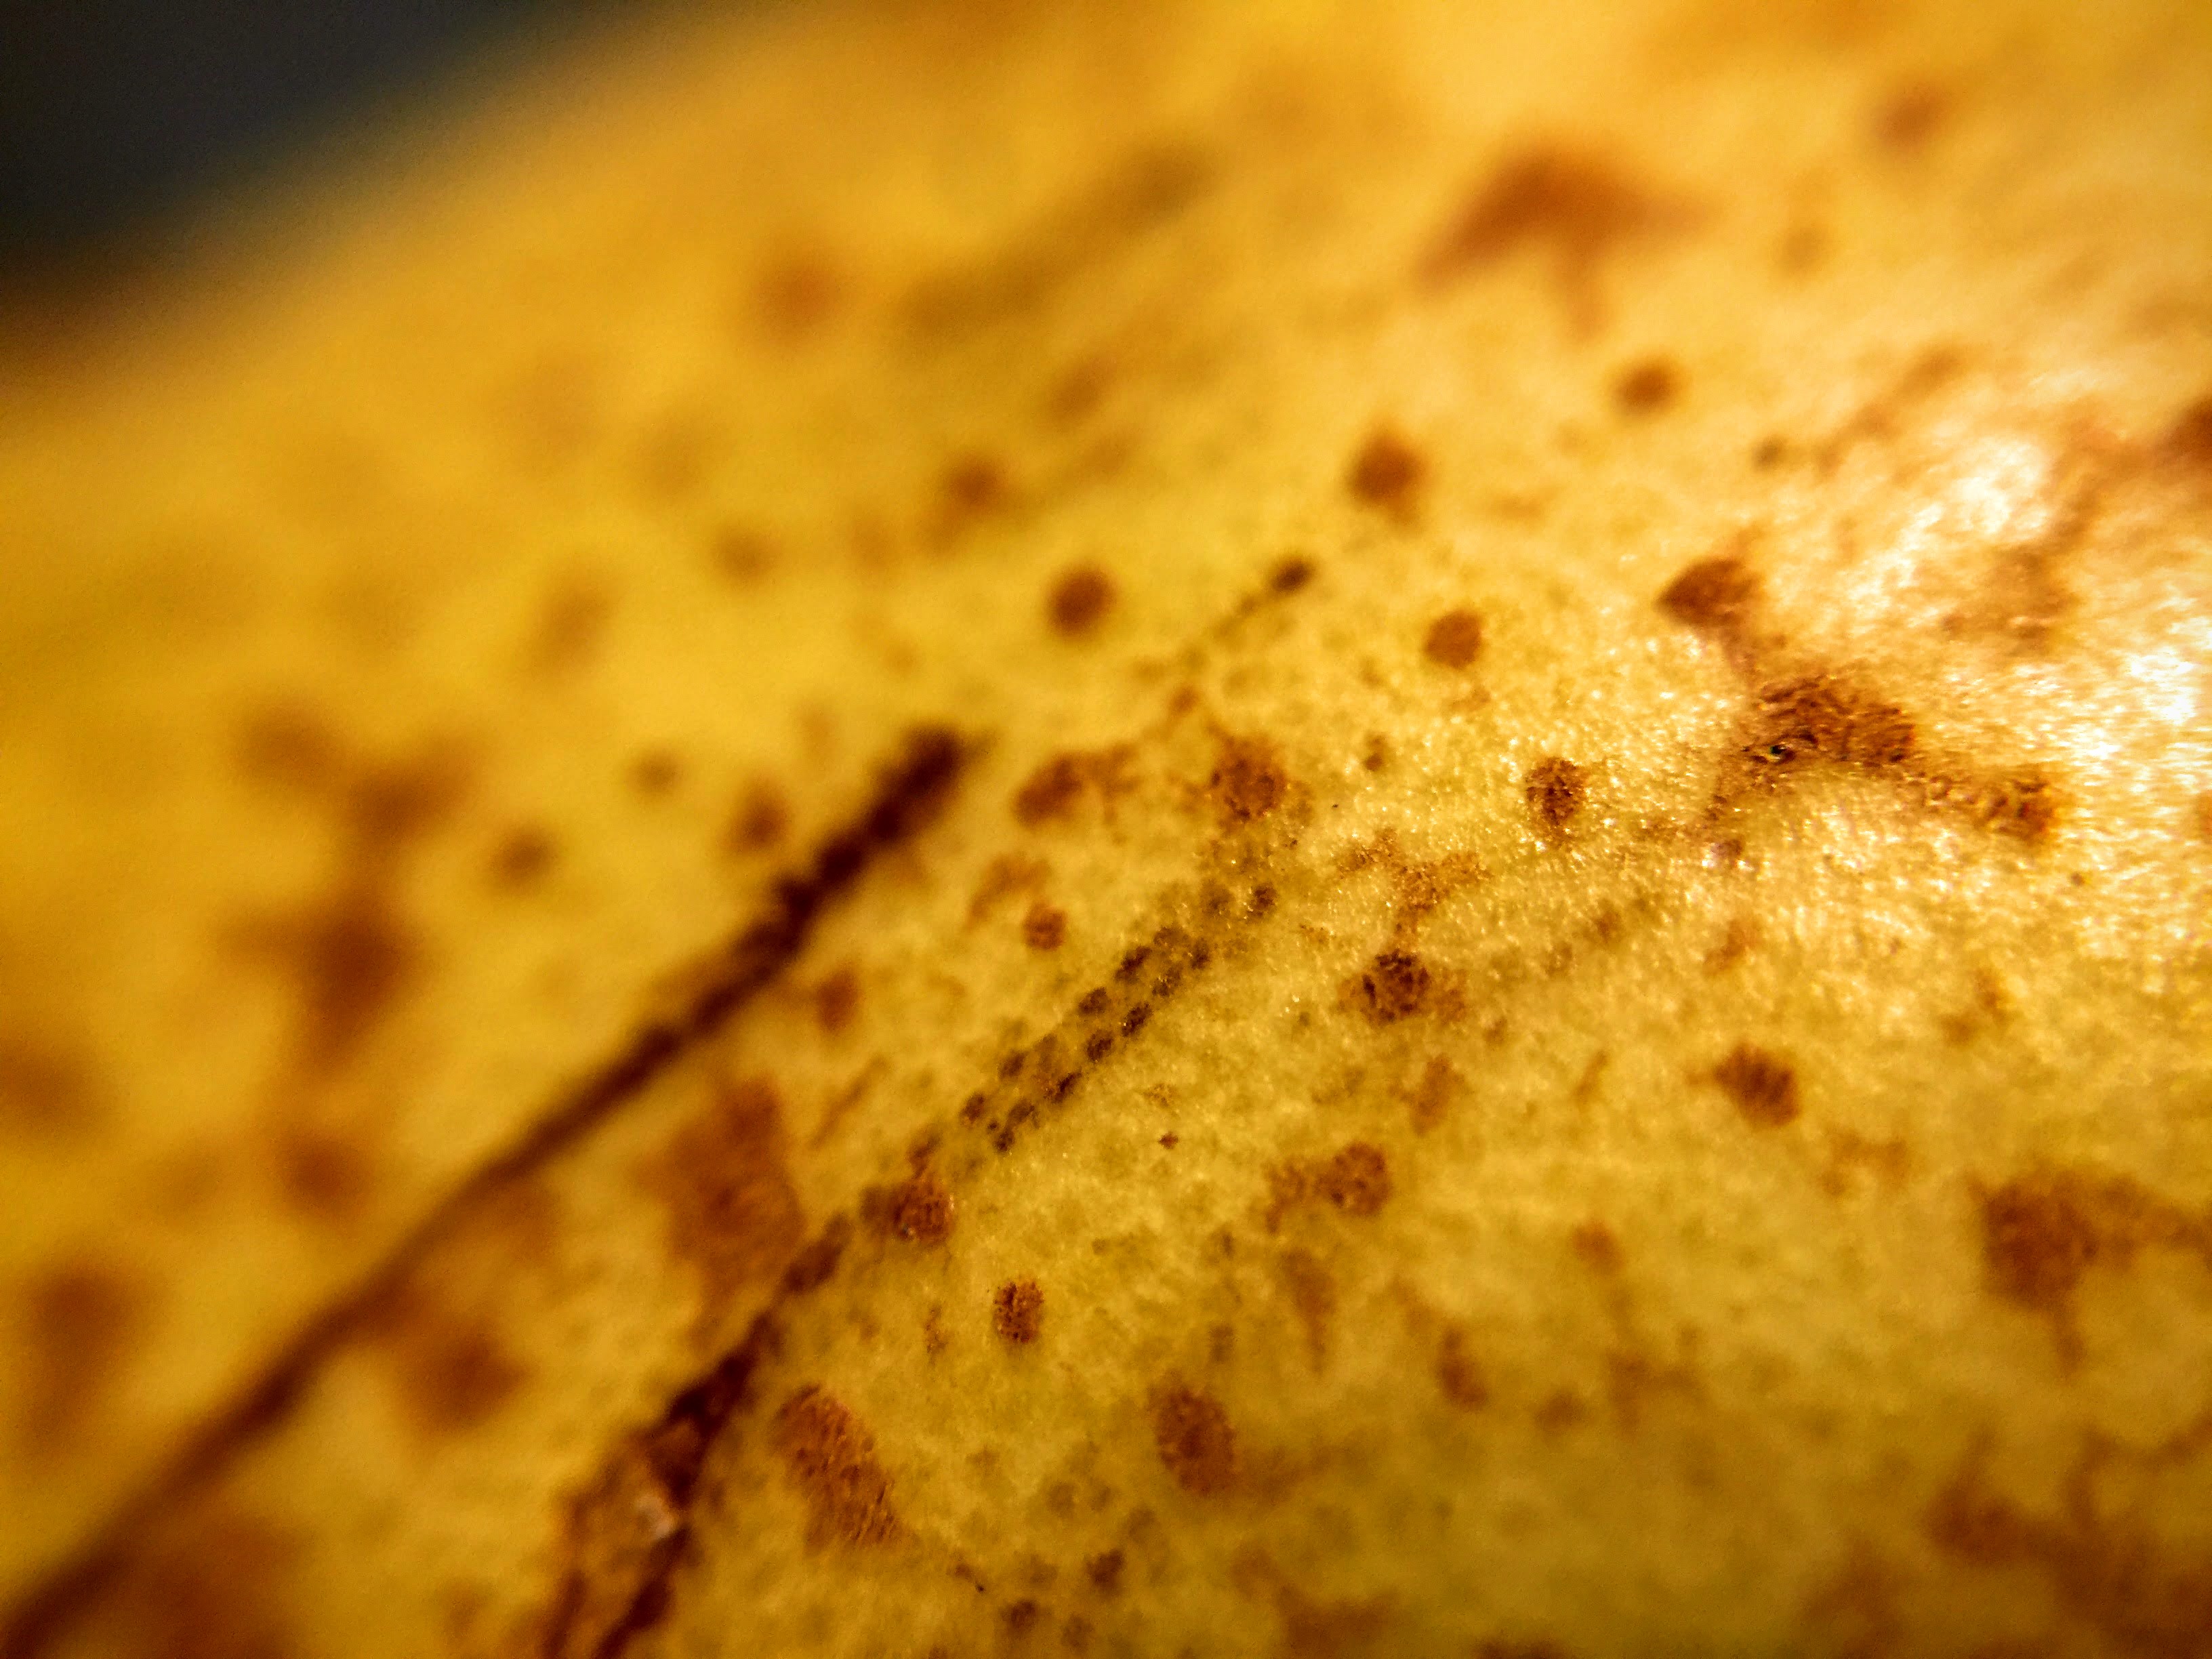 A Pear. Shot with the macro 15x lens.